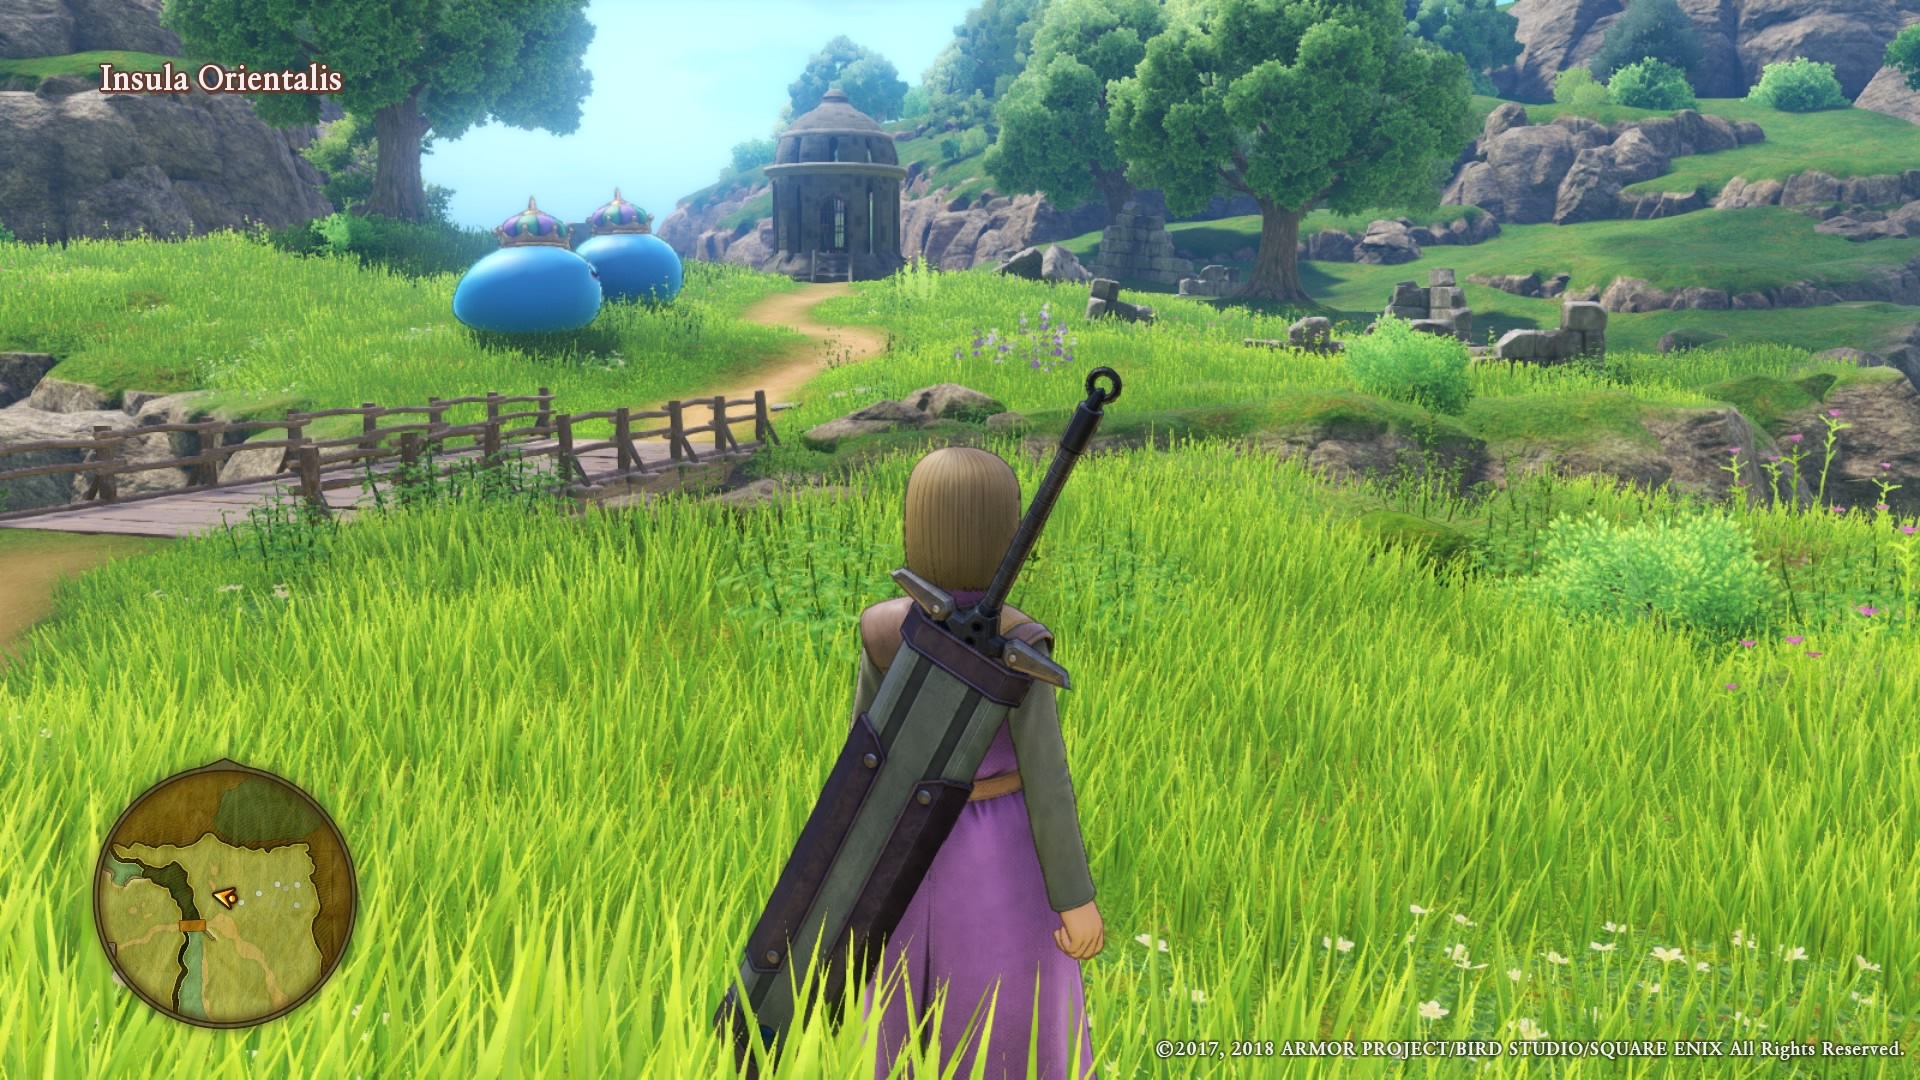 Metode dyd Grader celsius Dragon Quest XI Review - Nintendo Switch Definitive Edition Update -  GameSpot